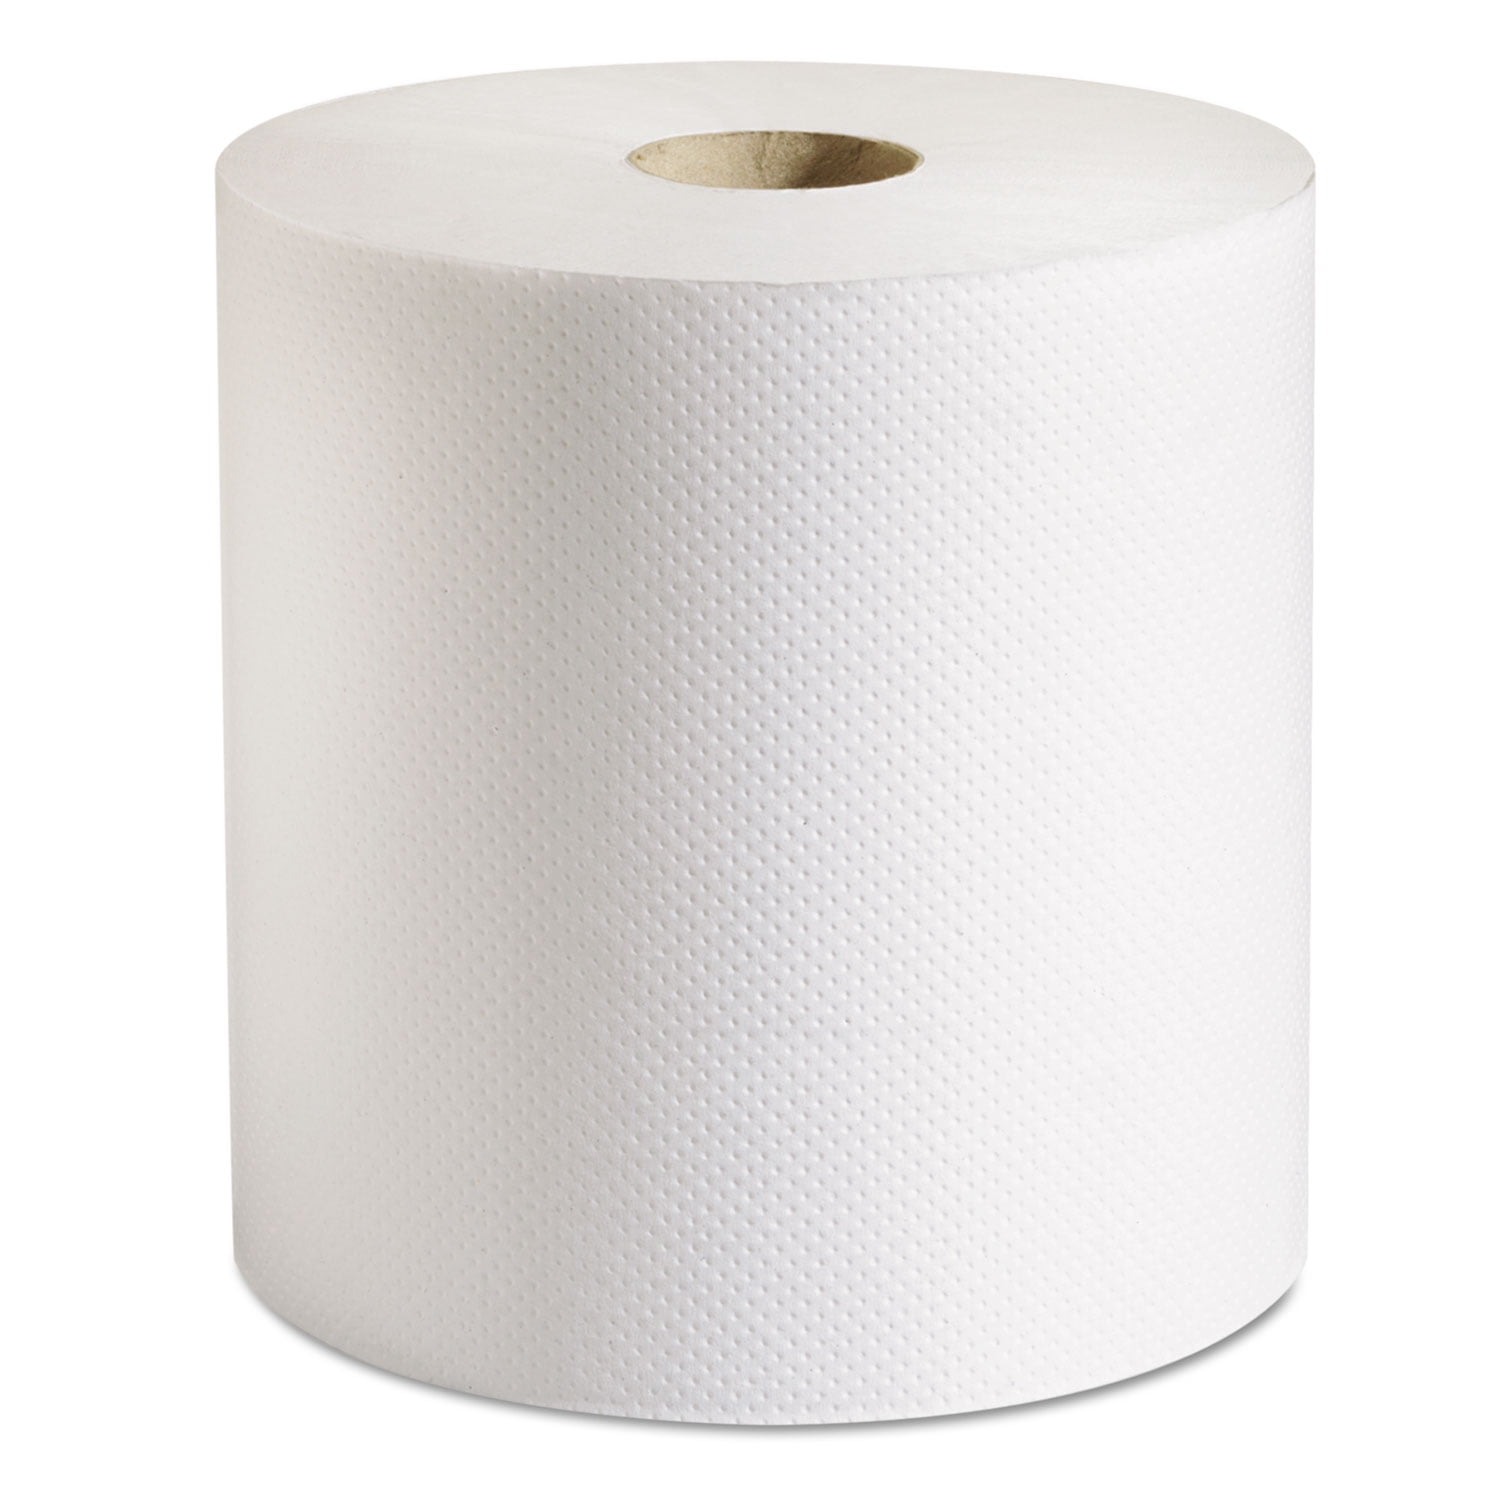 GENERAL SUPPLY Hardwound Roll Towels White 8" x 800 ft 6 Rolls/Carton 1820 